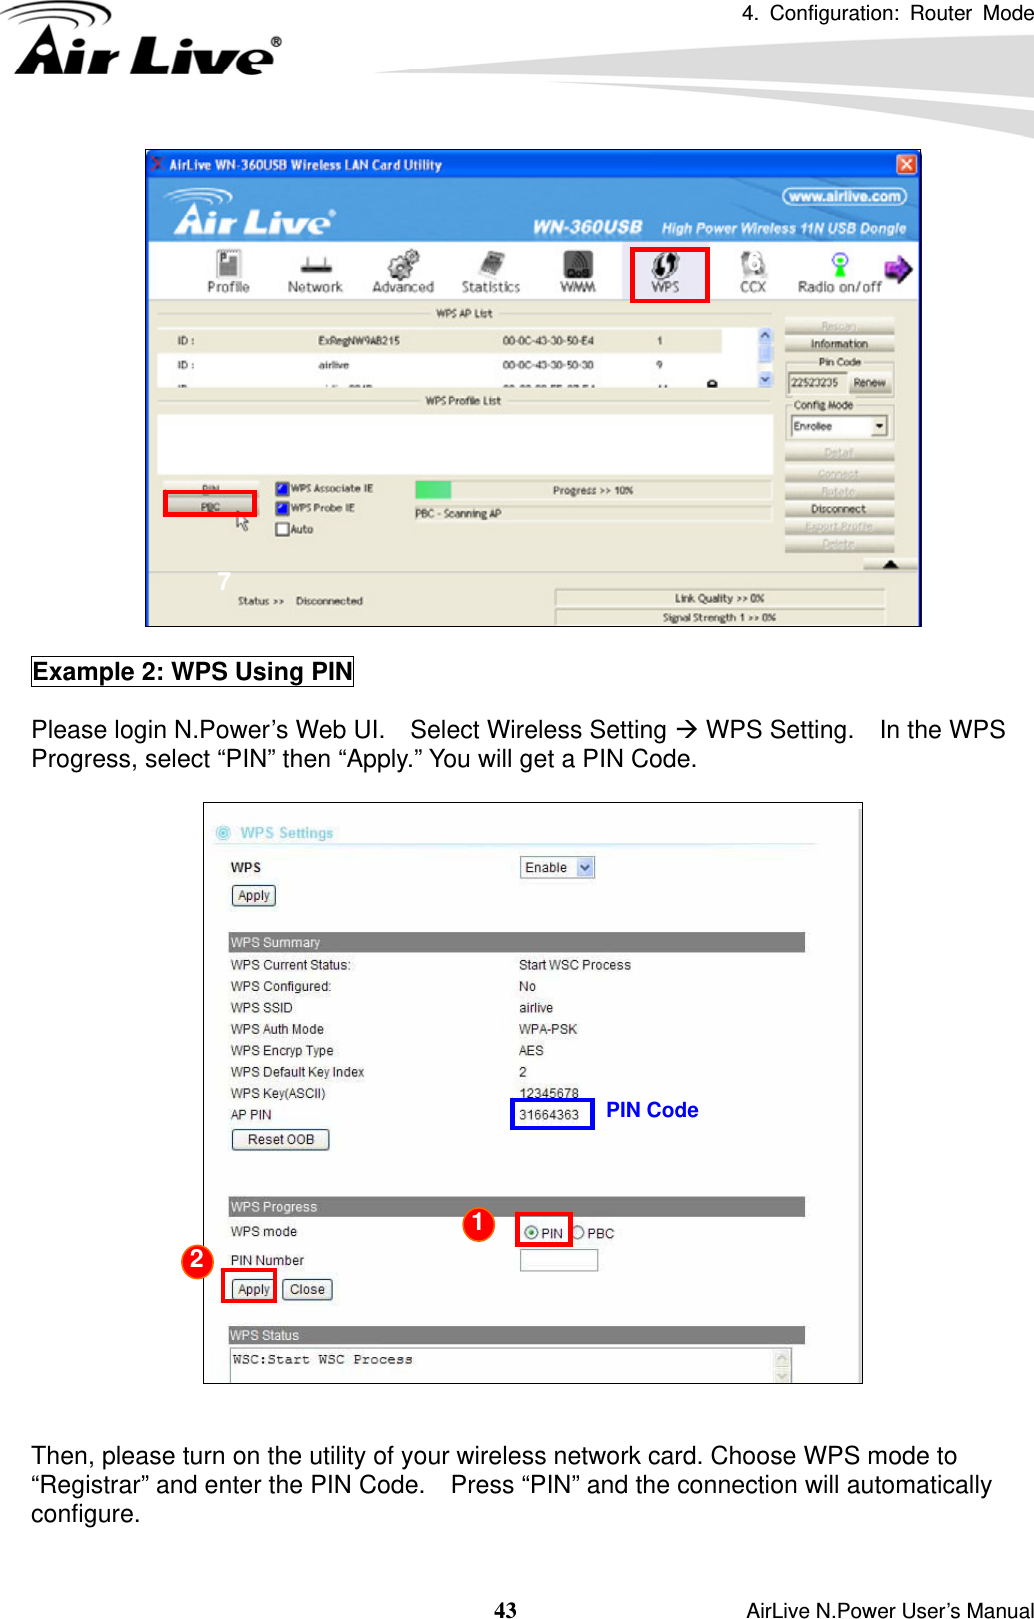 4. Configuration: Router Mode   43                    AirLive N.Power User’s Manual   Example 2: WPS Using PIN  Please login N.Power’s Web UI.    Select Wireless Setting Æ WPS Setting.    In the WPS Progress, select “PIN” then “Apply.” You will get a PIN Code.       Then, please turn on the utility of your wireless network card. Choose WPS mode to “Registrar” and enter the PIN Code.    Press “PIN” and the connection will automatically configure.   67 PIN Code 1 2 